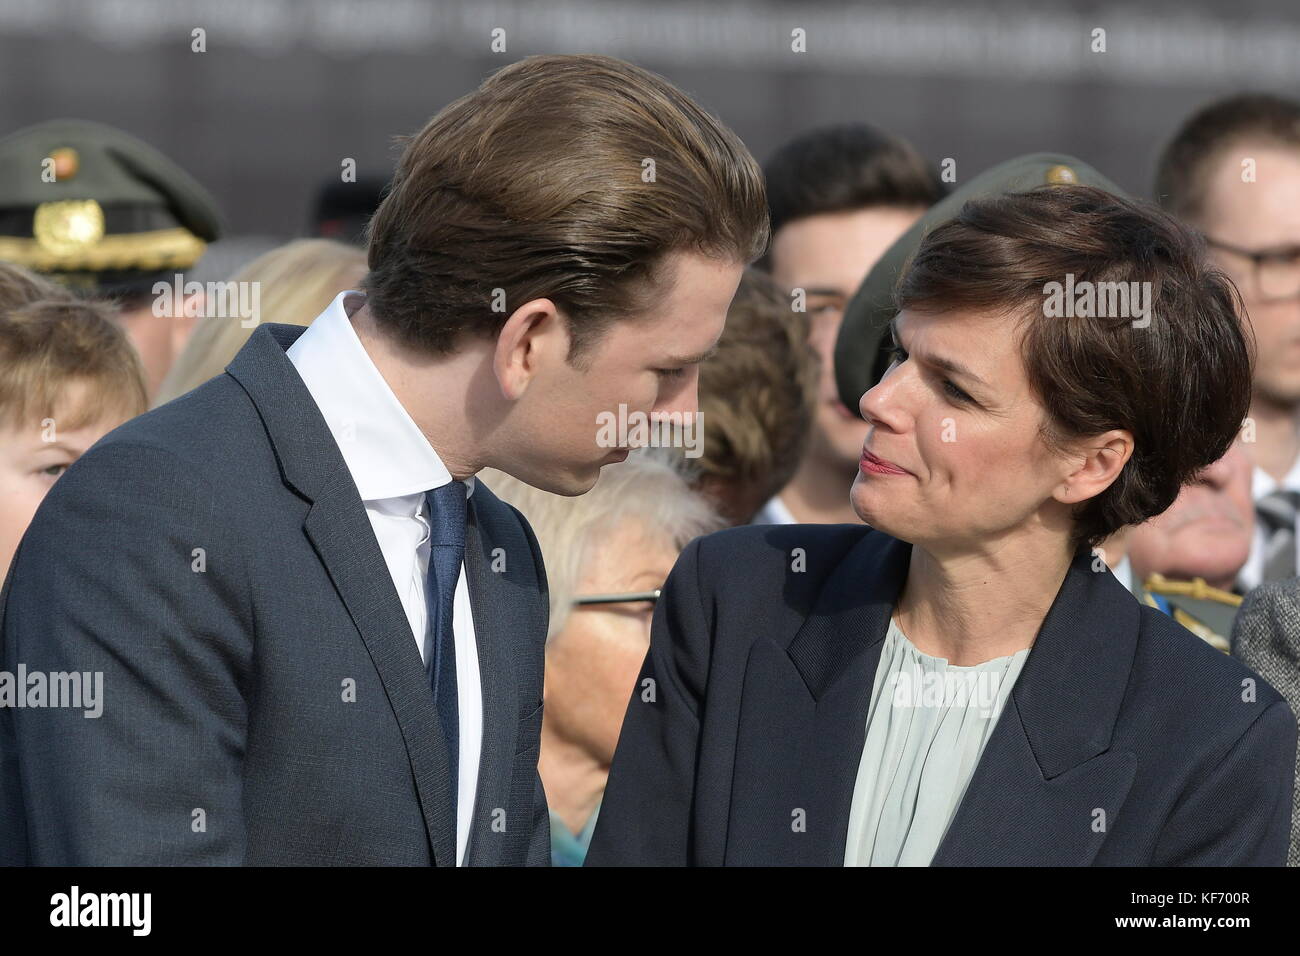 Vienna, Austria. 26 October 2017. Austrian National Day 2017 in the presence of the Federal President and the Austrian Federal Government at Heldenplatz in Vienna. Over 1000 recruits were engaged in the service in the army. In the picture Foreign Minister Sebastian Kurz (L) and Federal Minister Rendi Wagner (R). Credit: Franz Perc / Alamy Live News Stock Photo